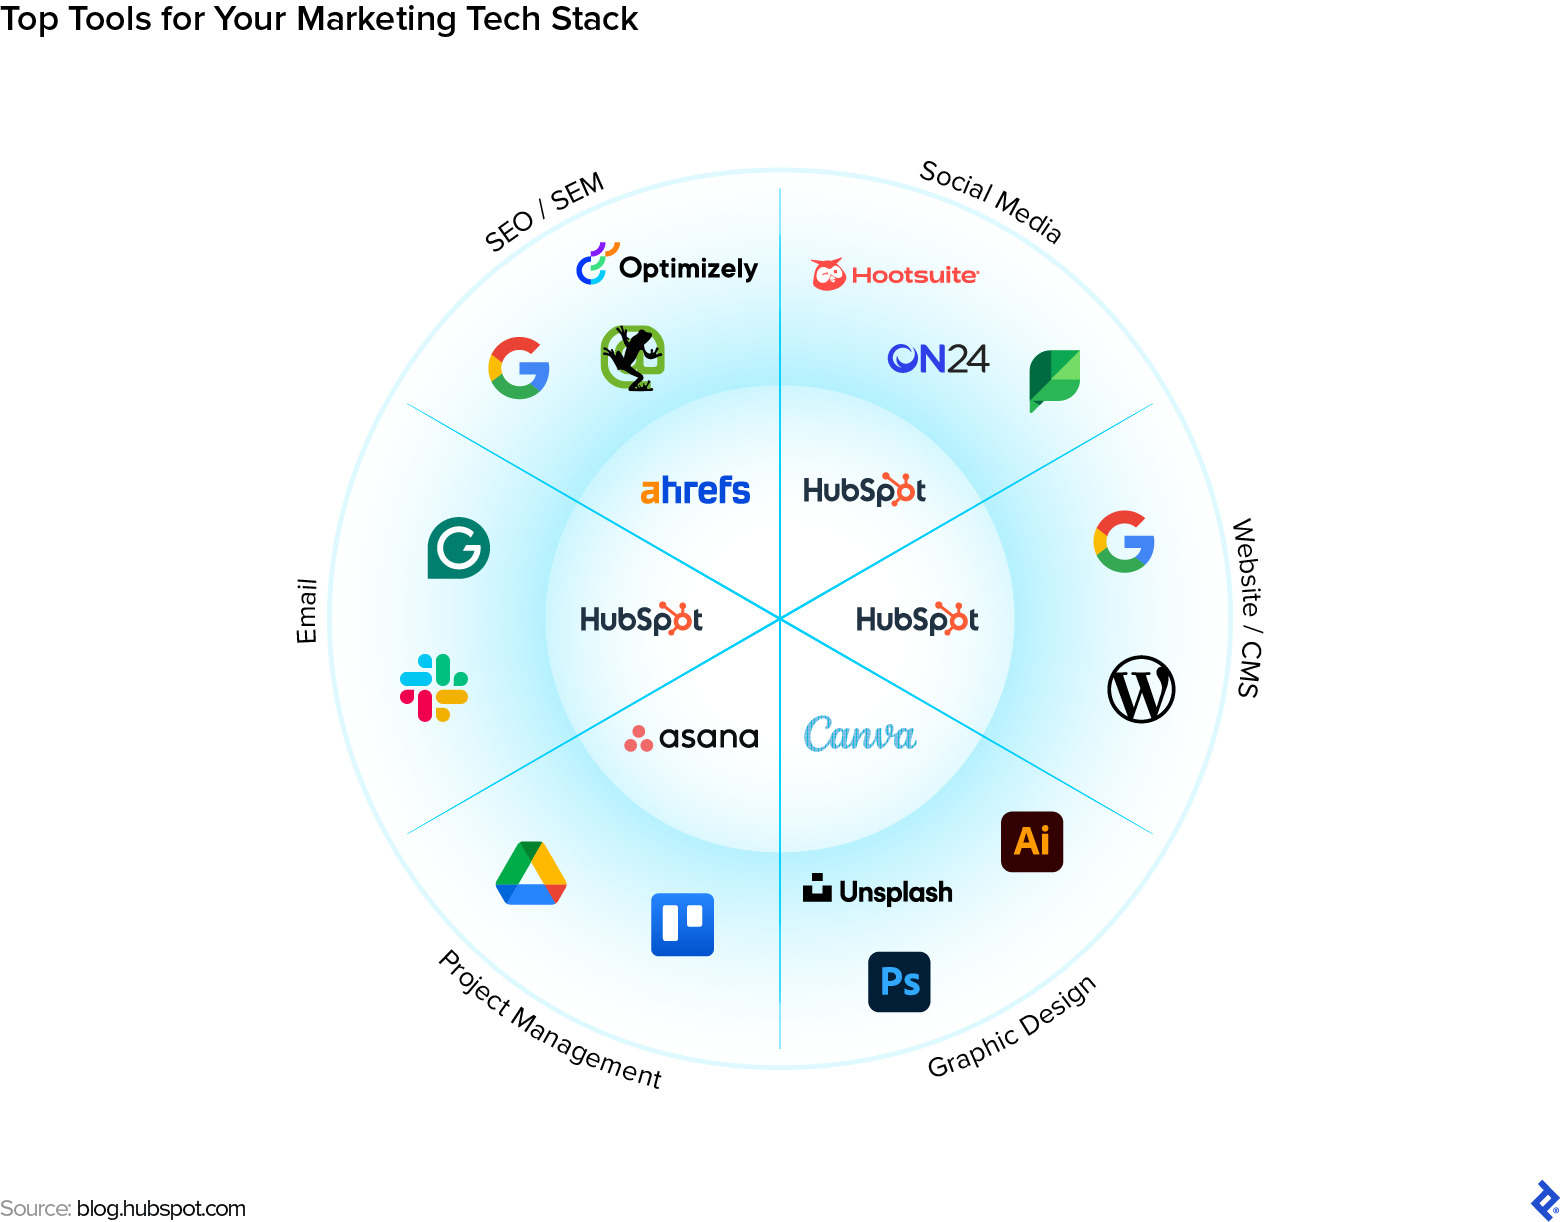 A diagram displays popular tools that are used by various marketing divisions, including project management, SEO, social media, and graphic design.